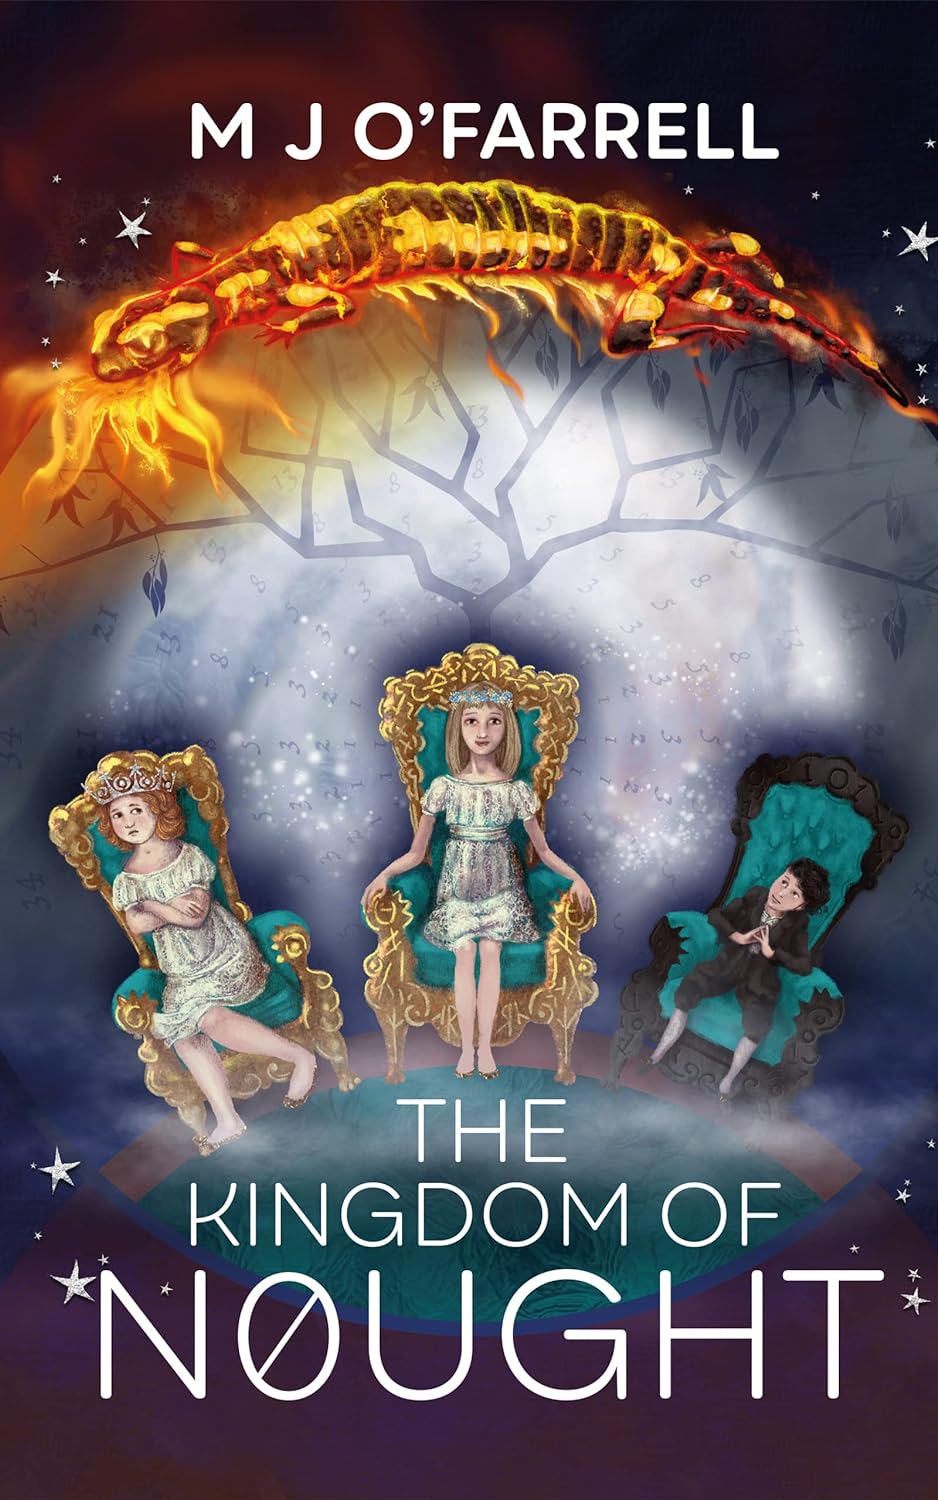 The Kingdom of Nought: The Thrilling Magical Adventure Story by Author Michael O’Farrell